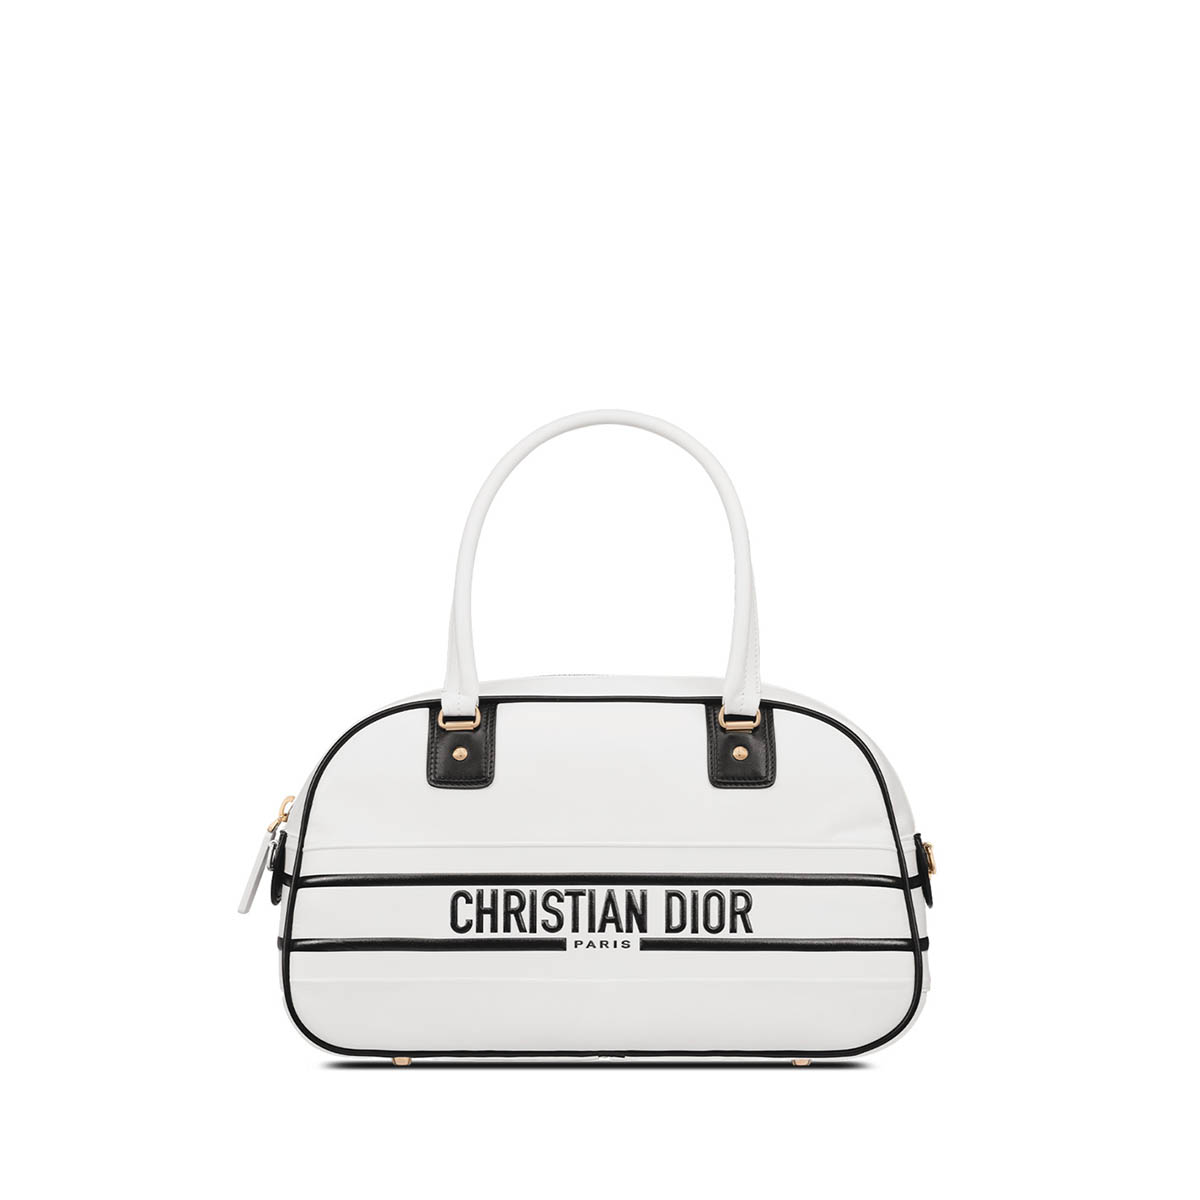 Dior's Vibe Collection